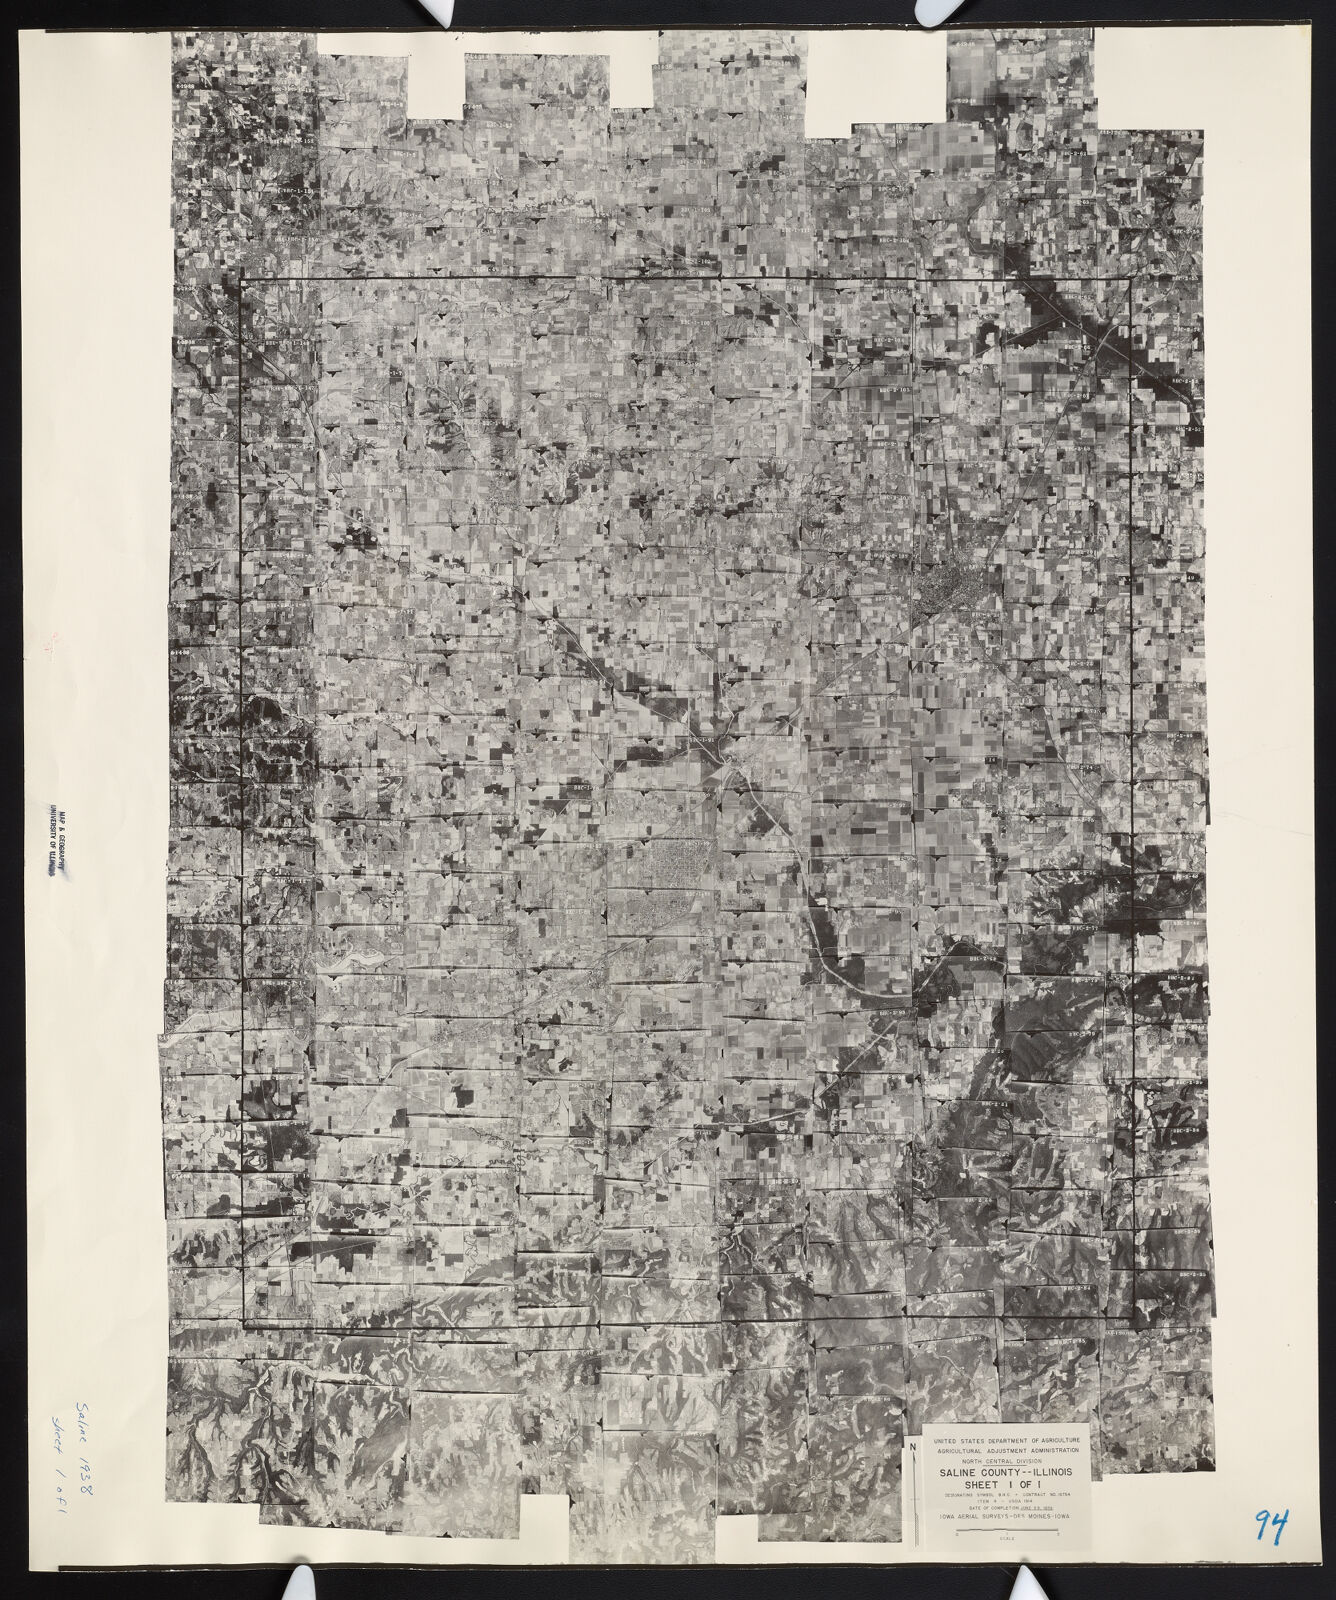 Saline County, Illinois : [aerial photographs] | Digital Collections at ...